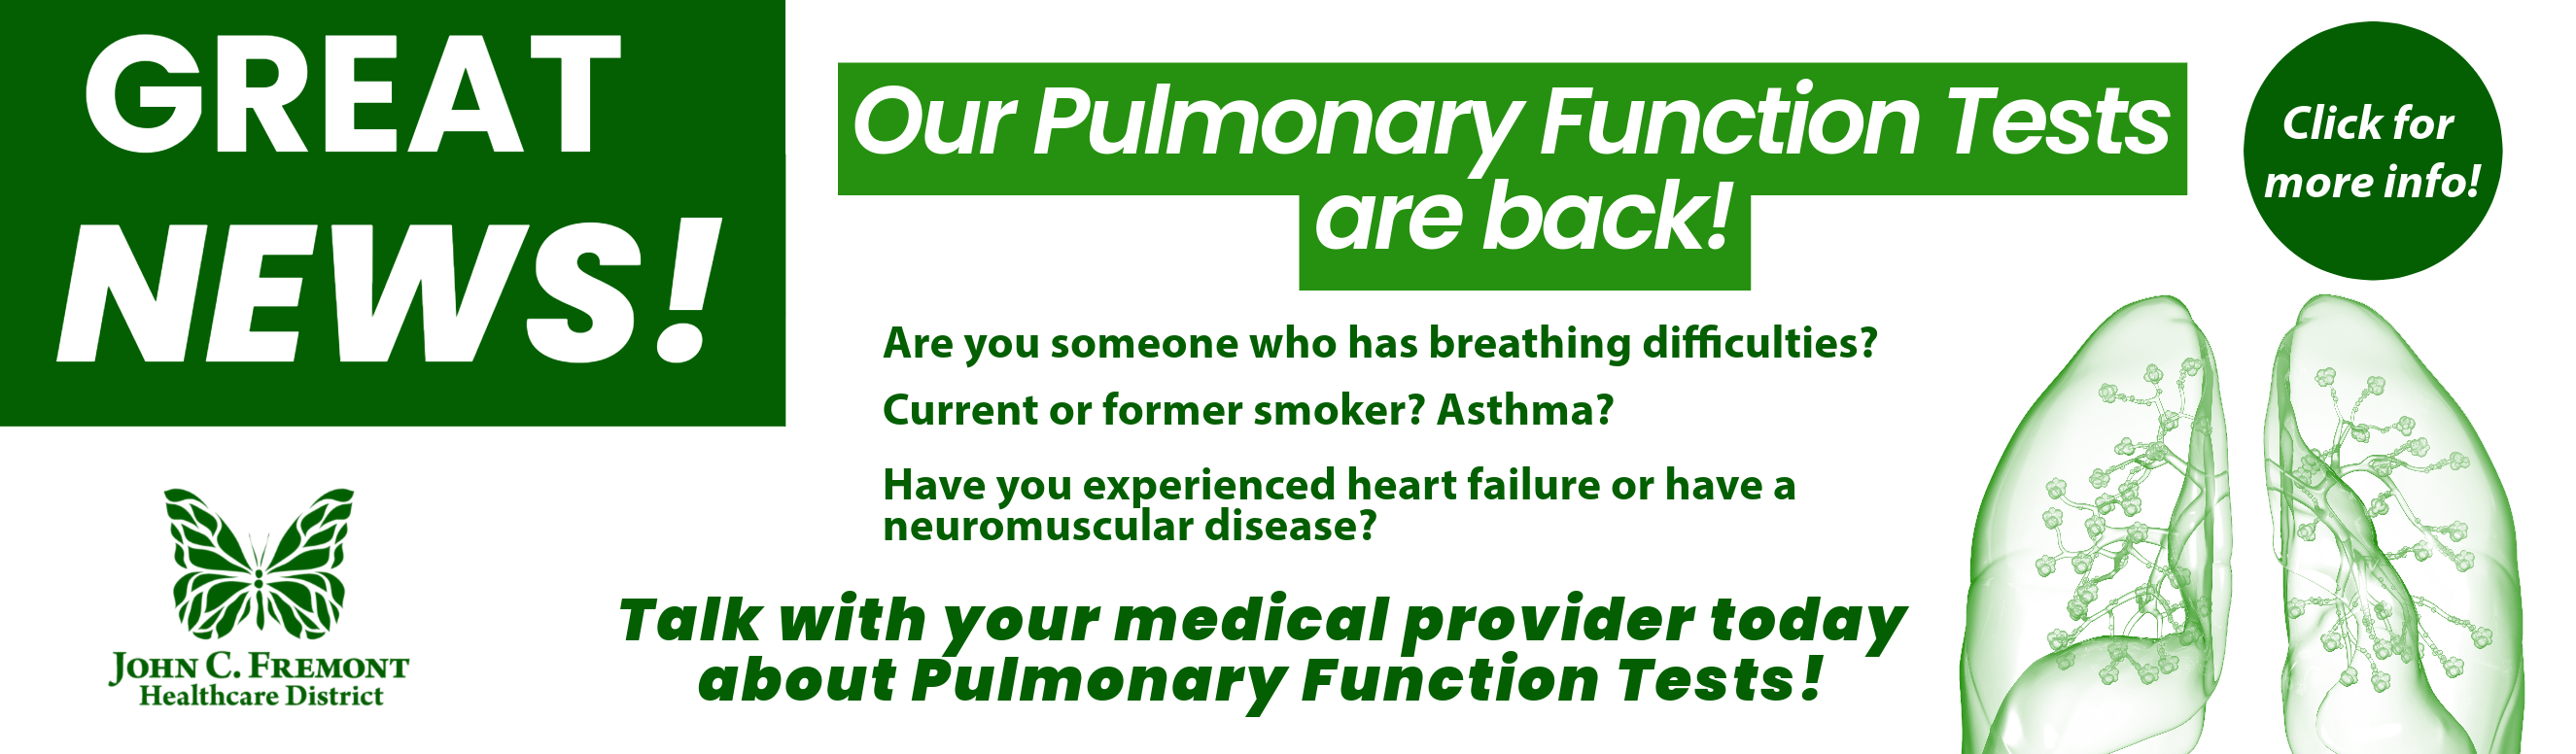 GREAT NEWS! Our Pulmonary Function Tests are back! Talk to your medical provider today to find out if this is something for you. Click here for video demonstration of a PFT.